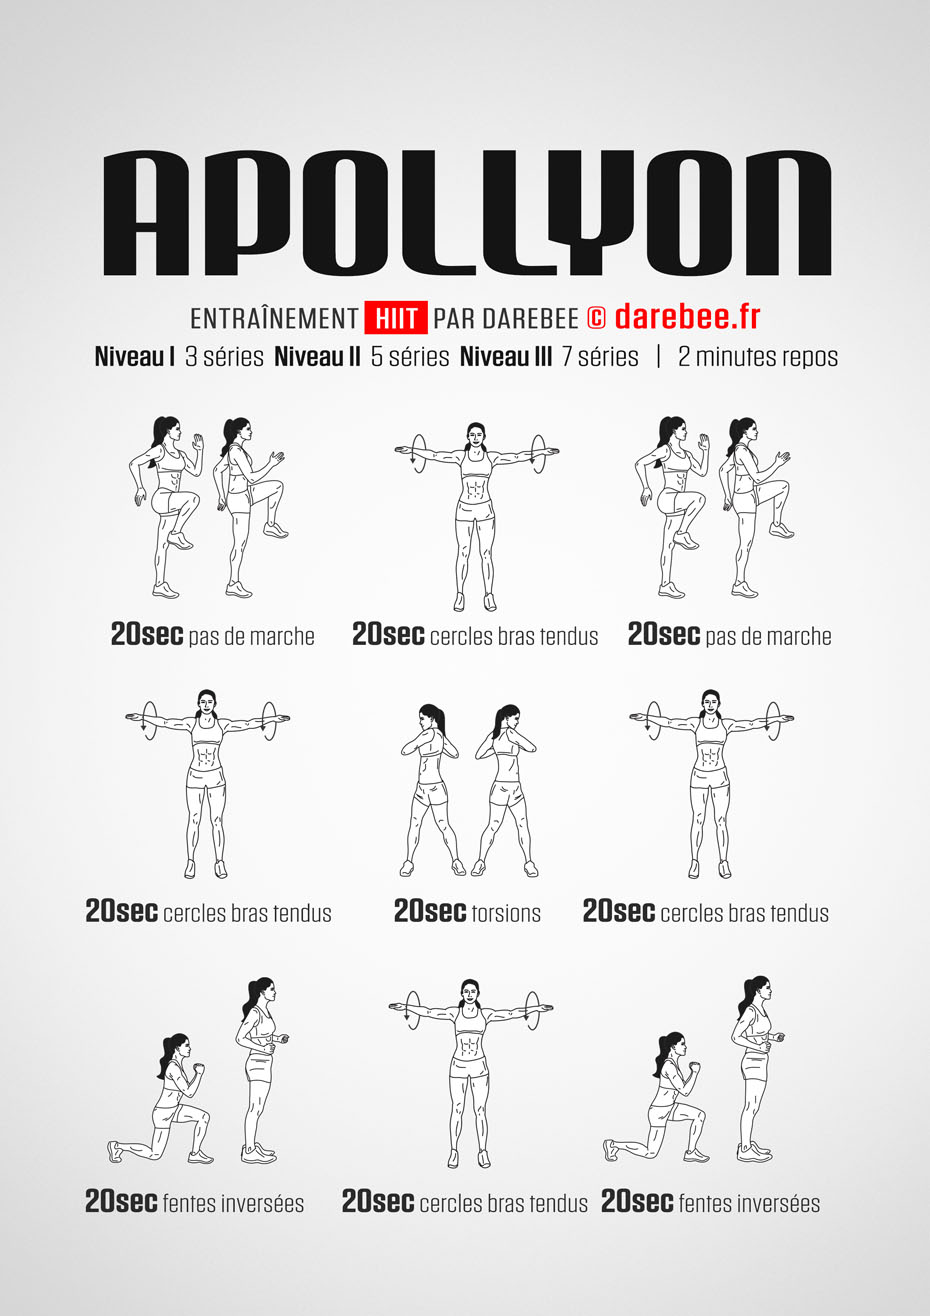 Apollyon is a free HIIT workout by Darebee